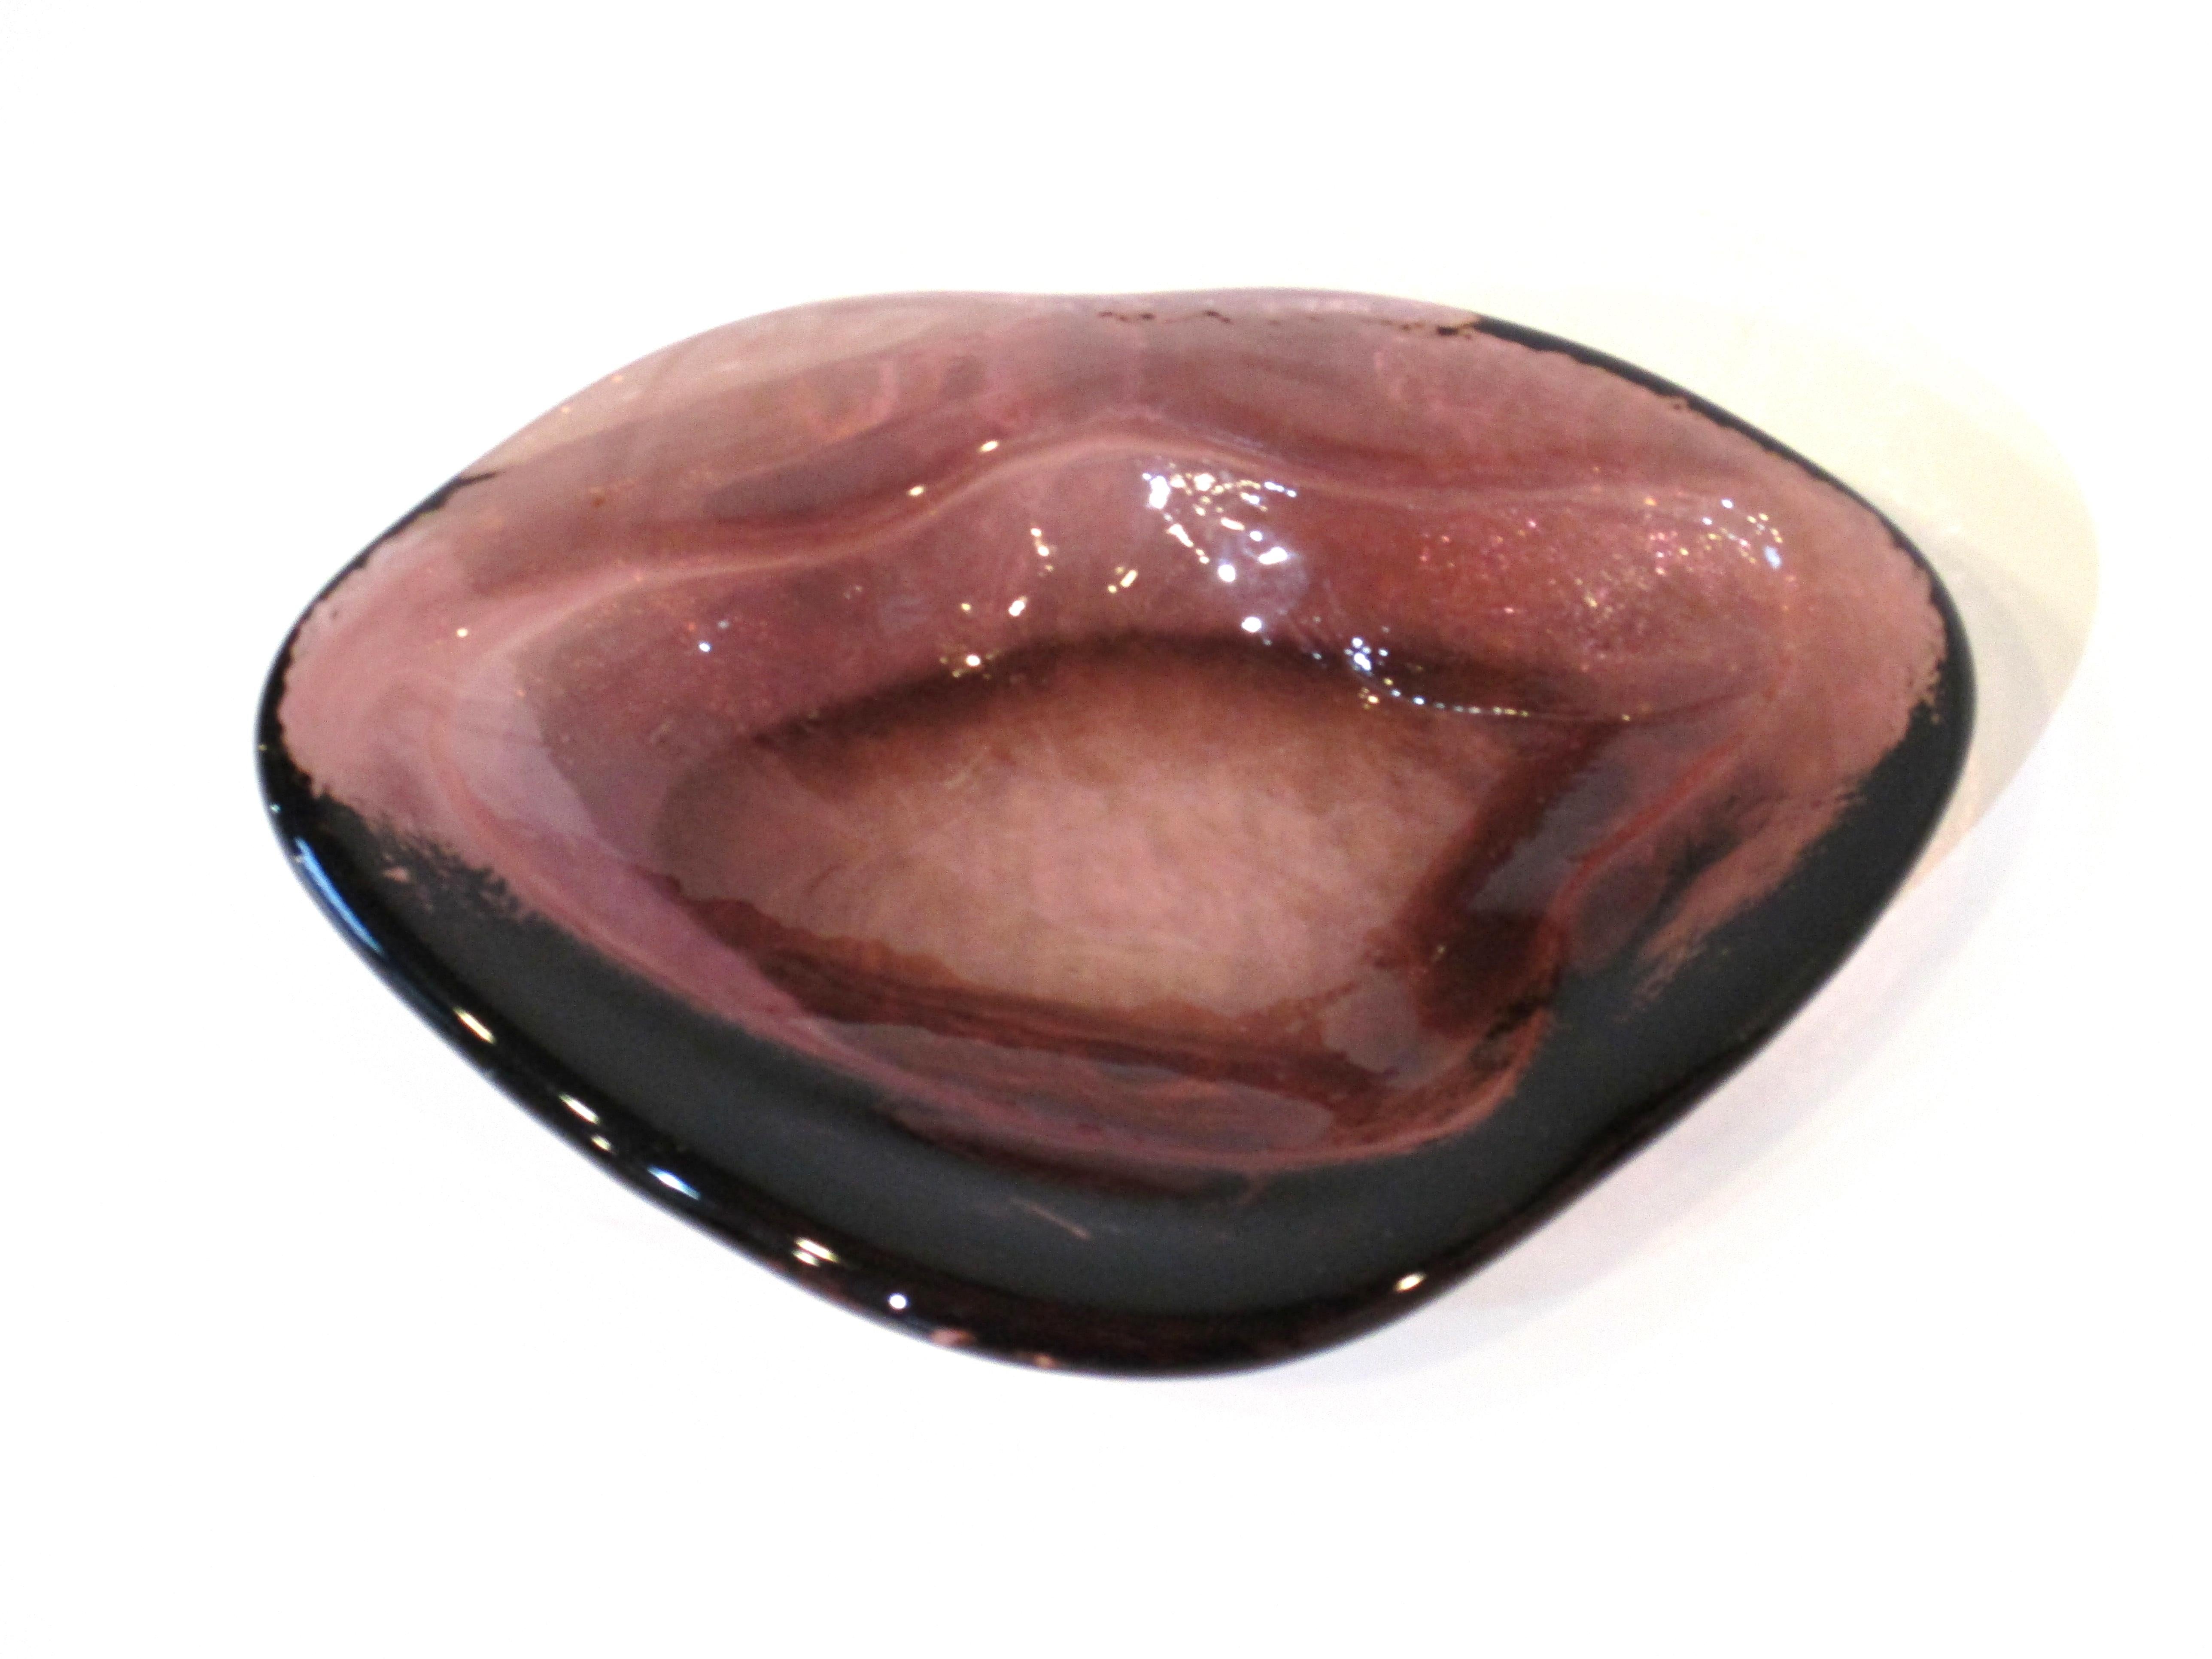 A freeform art glass bowl in a darker amethyst crafted by Anderson for the Blenko glass company in the 1950's .